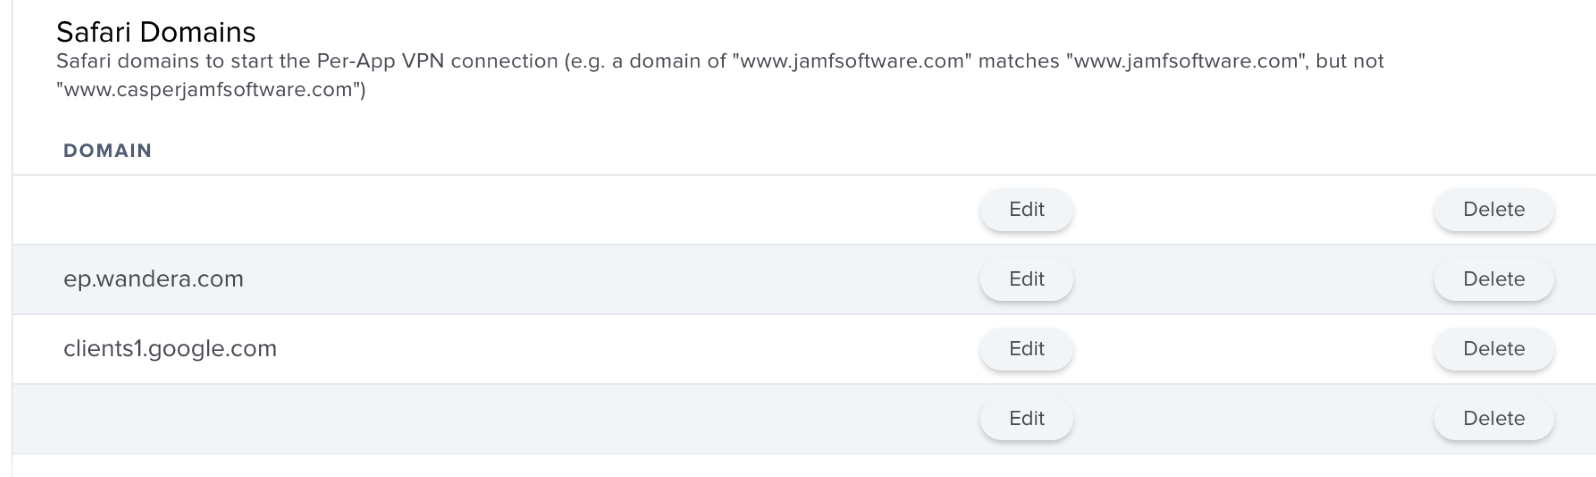 A screenshot of the Safari Domains screen in Jamf Pro, showing the default domains, ep.wandera.com and clients1.google.com.